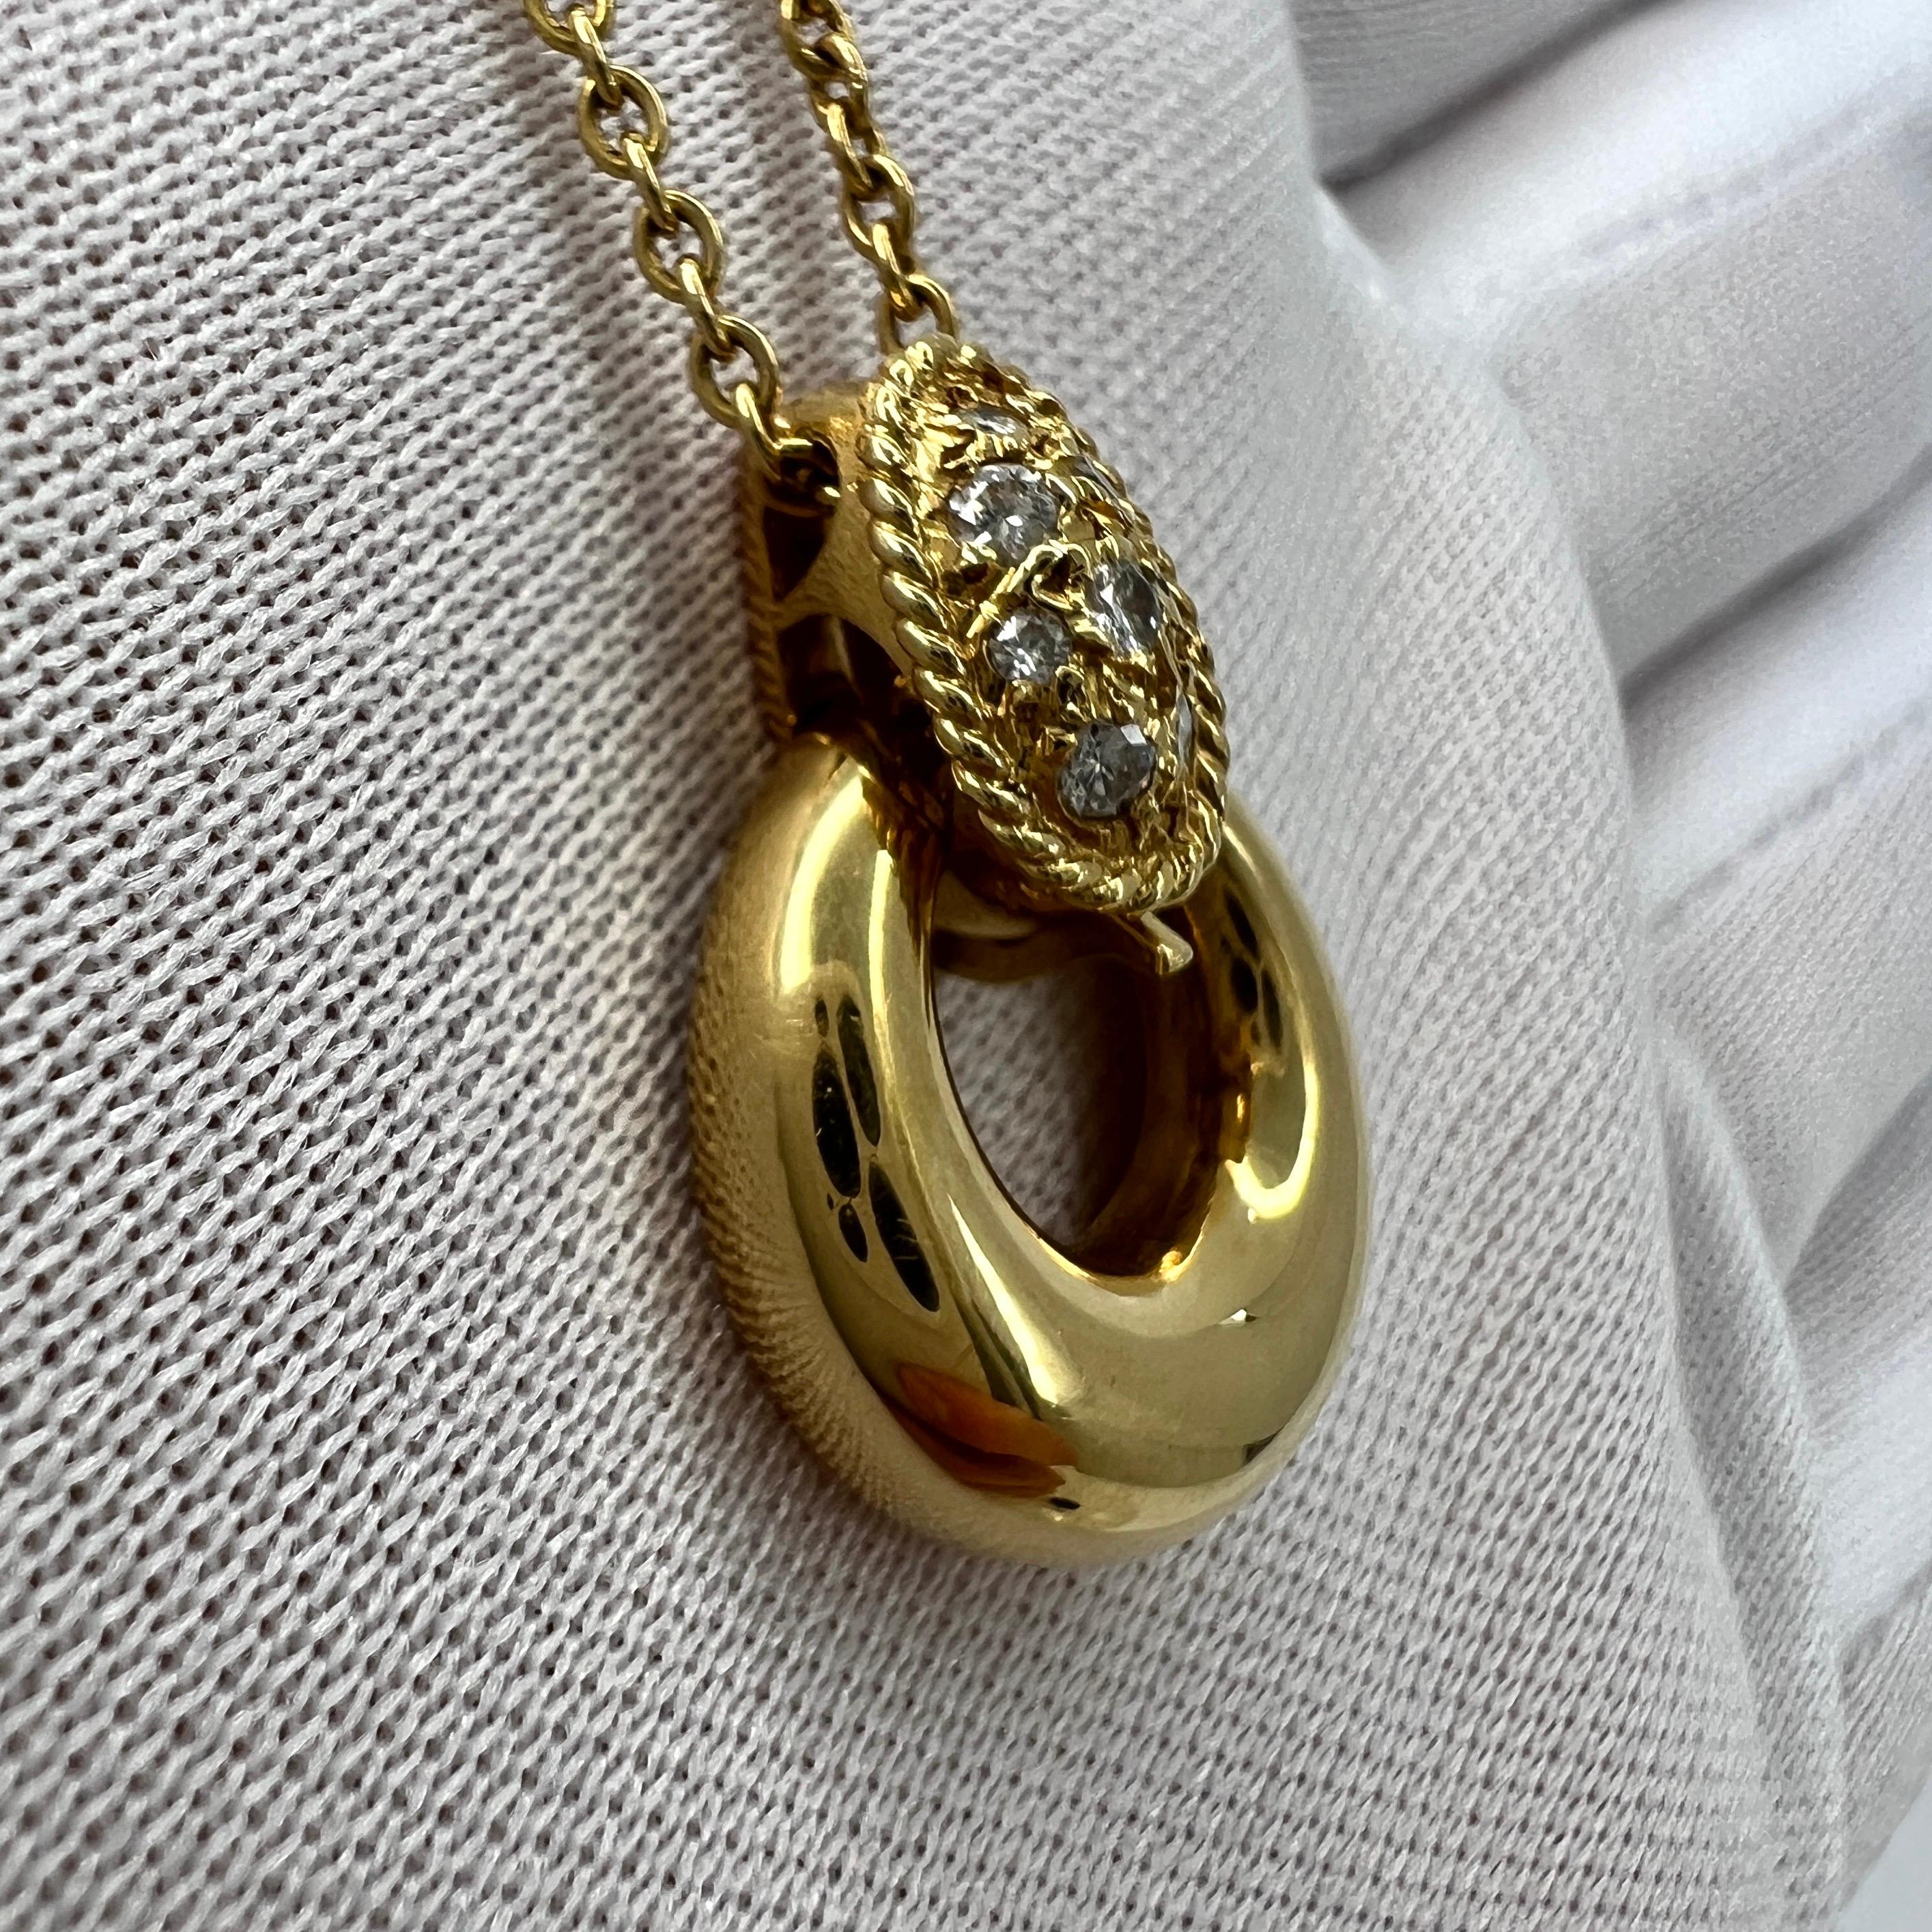 Rare Vintage Van Cleef & Arpels Round Diamond 18k Yellow Gold Pendant Necklace In Excellent Condition For Sale In Birmingham, GB